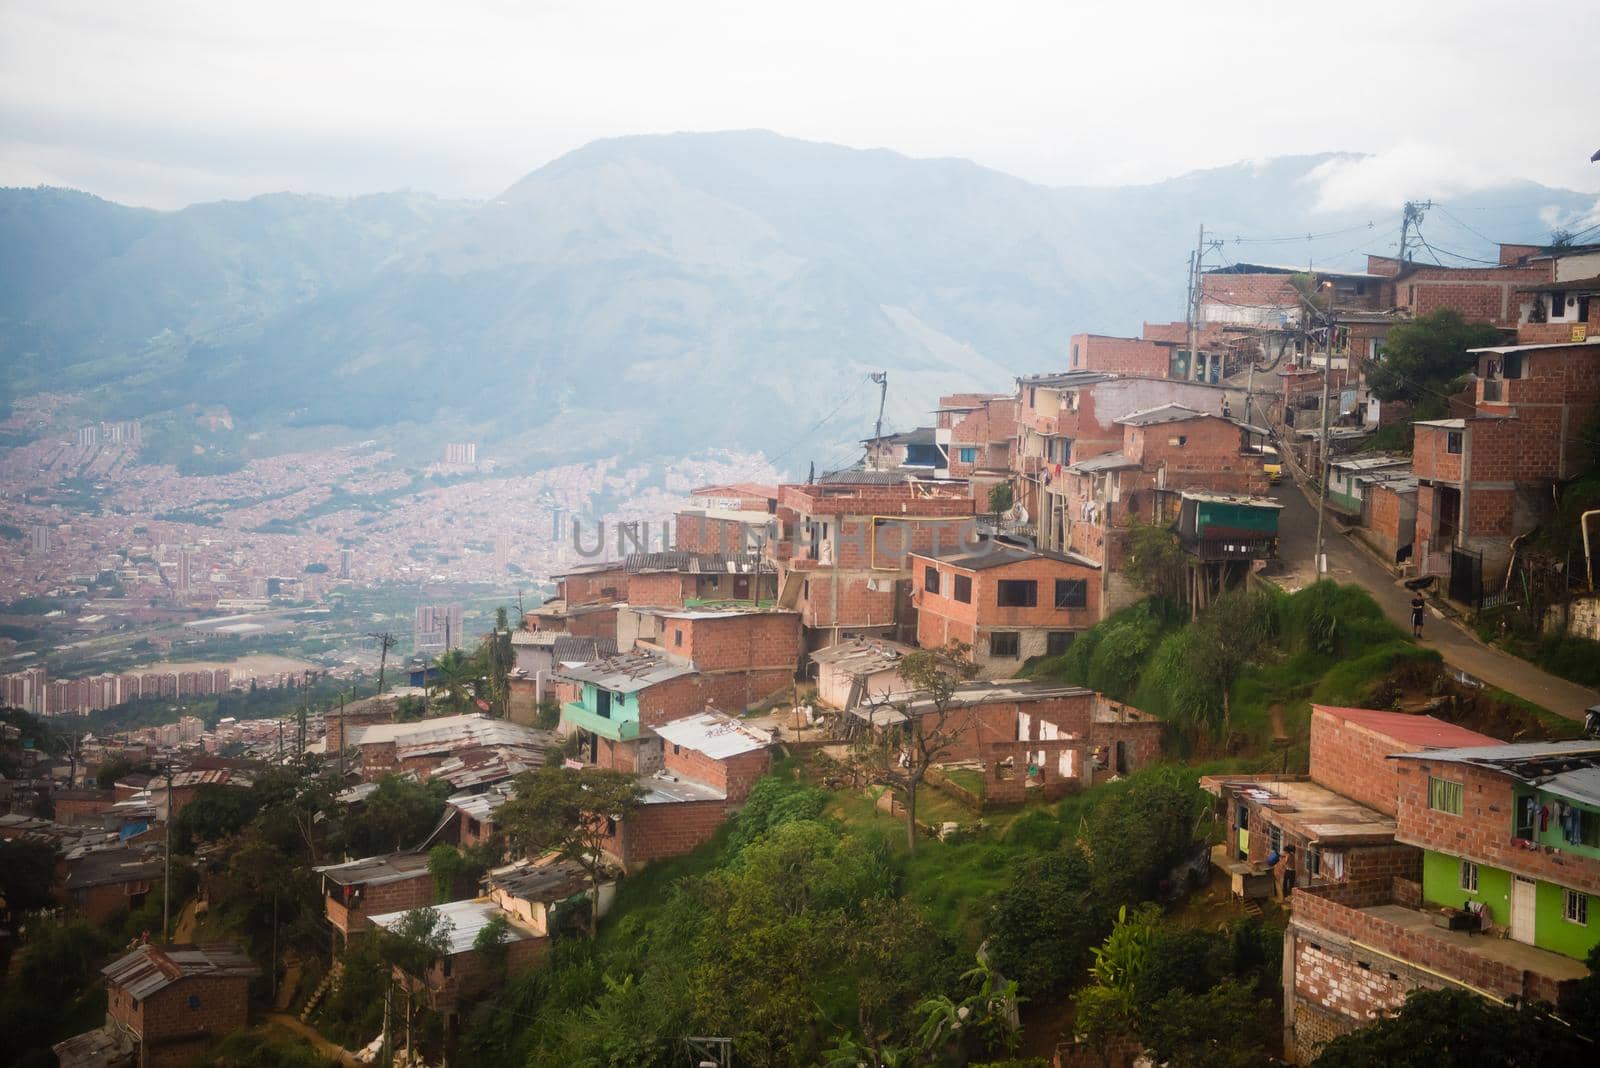 View of houses on hillside in Medellin, Colombia.